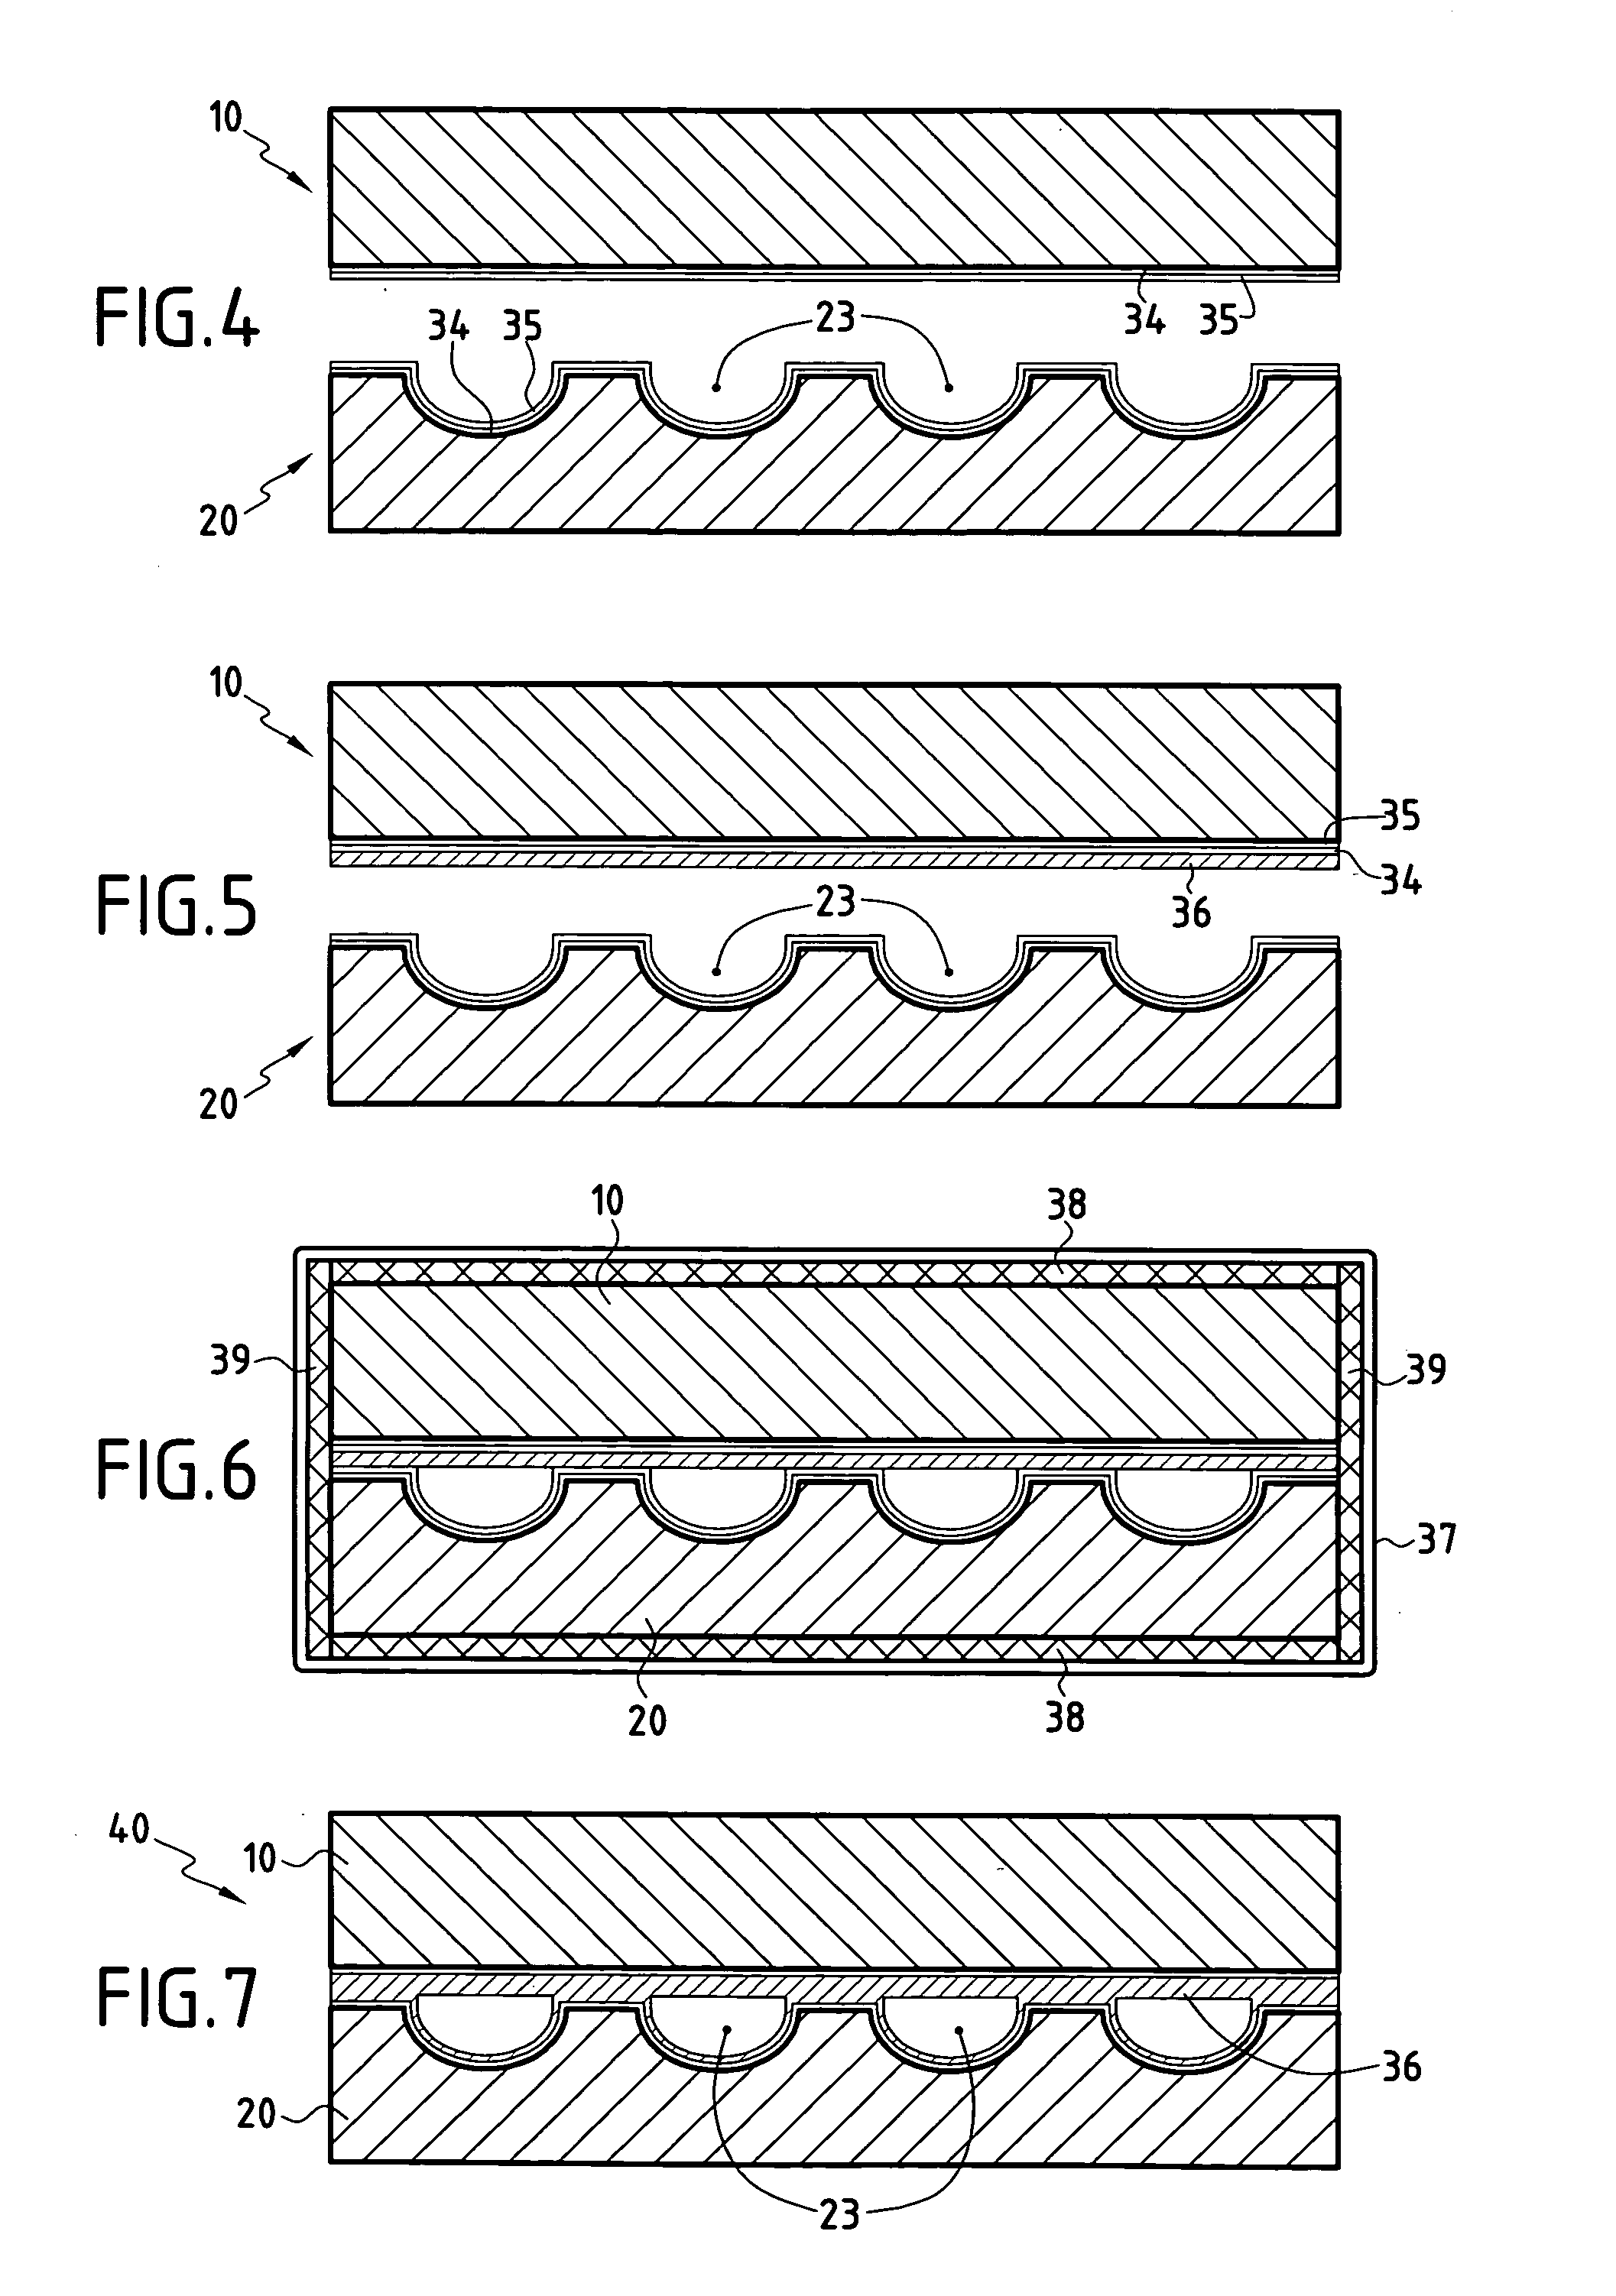 Method of manufacturing an active cooling panel out of thermostructural composite material